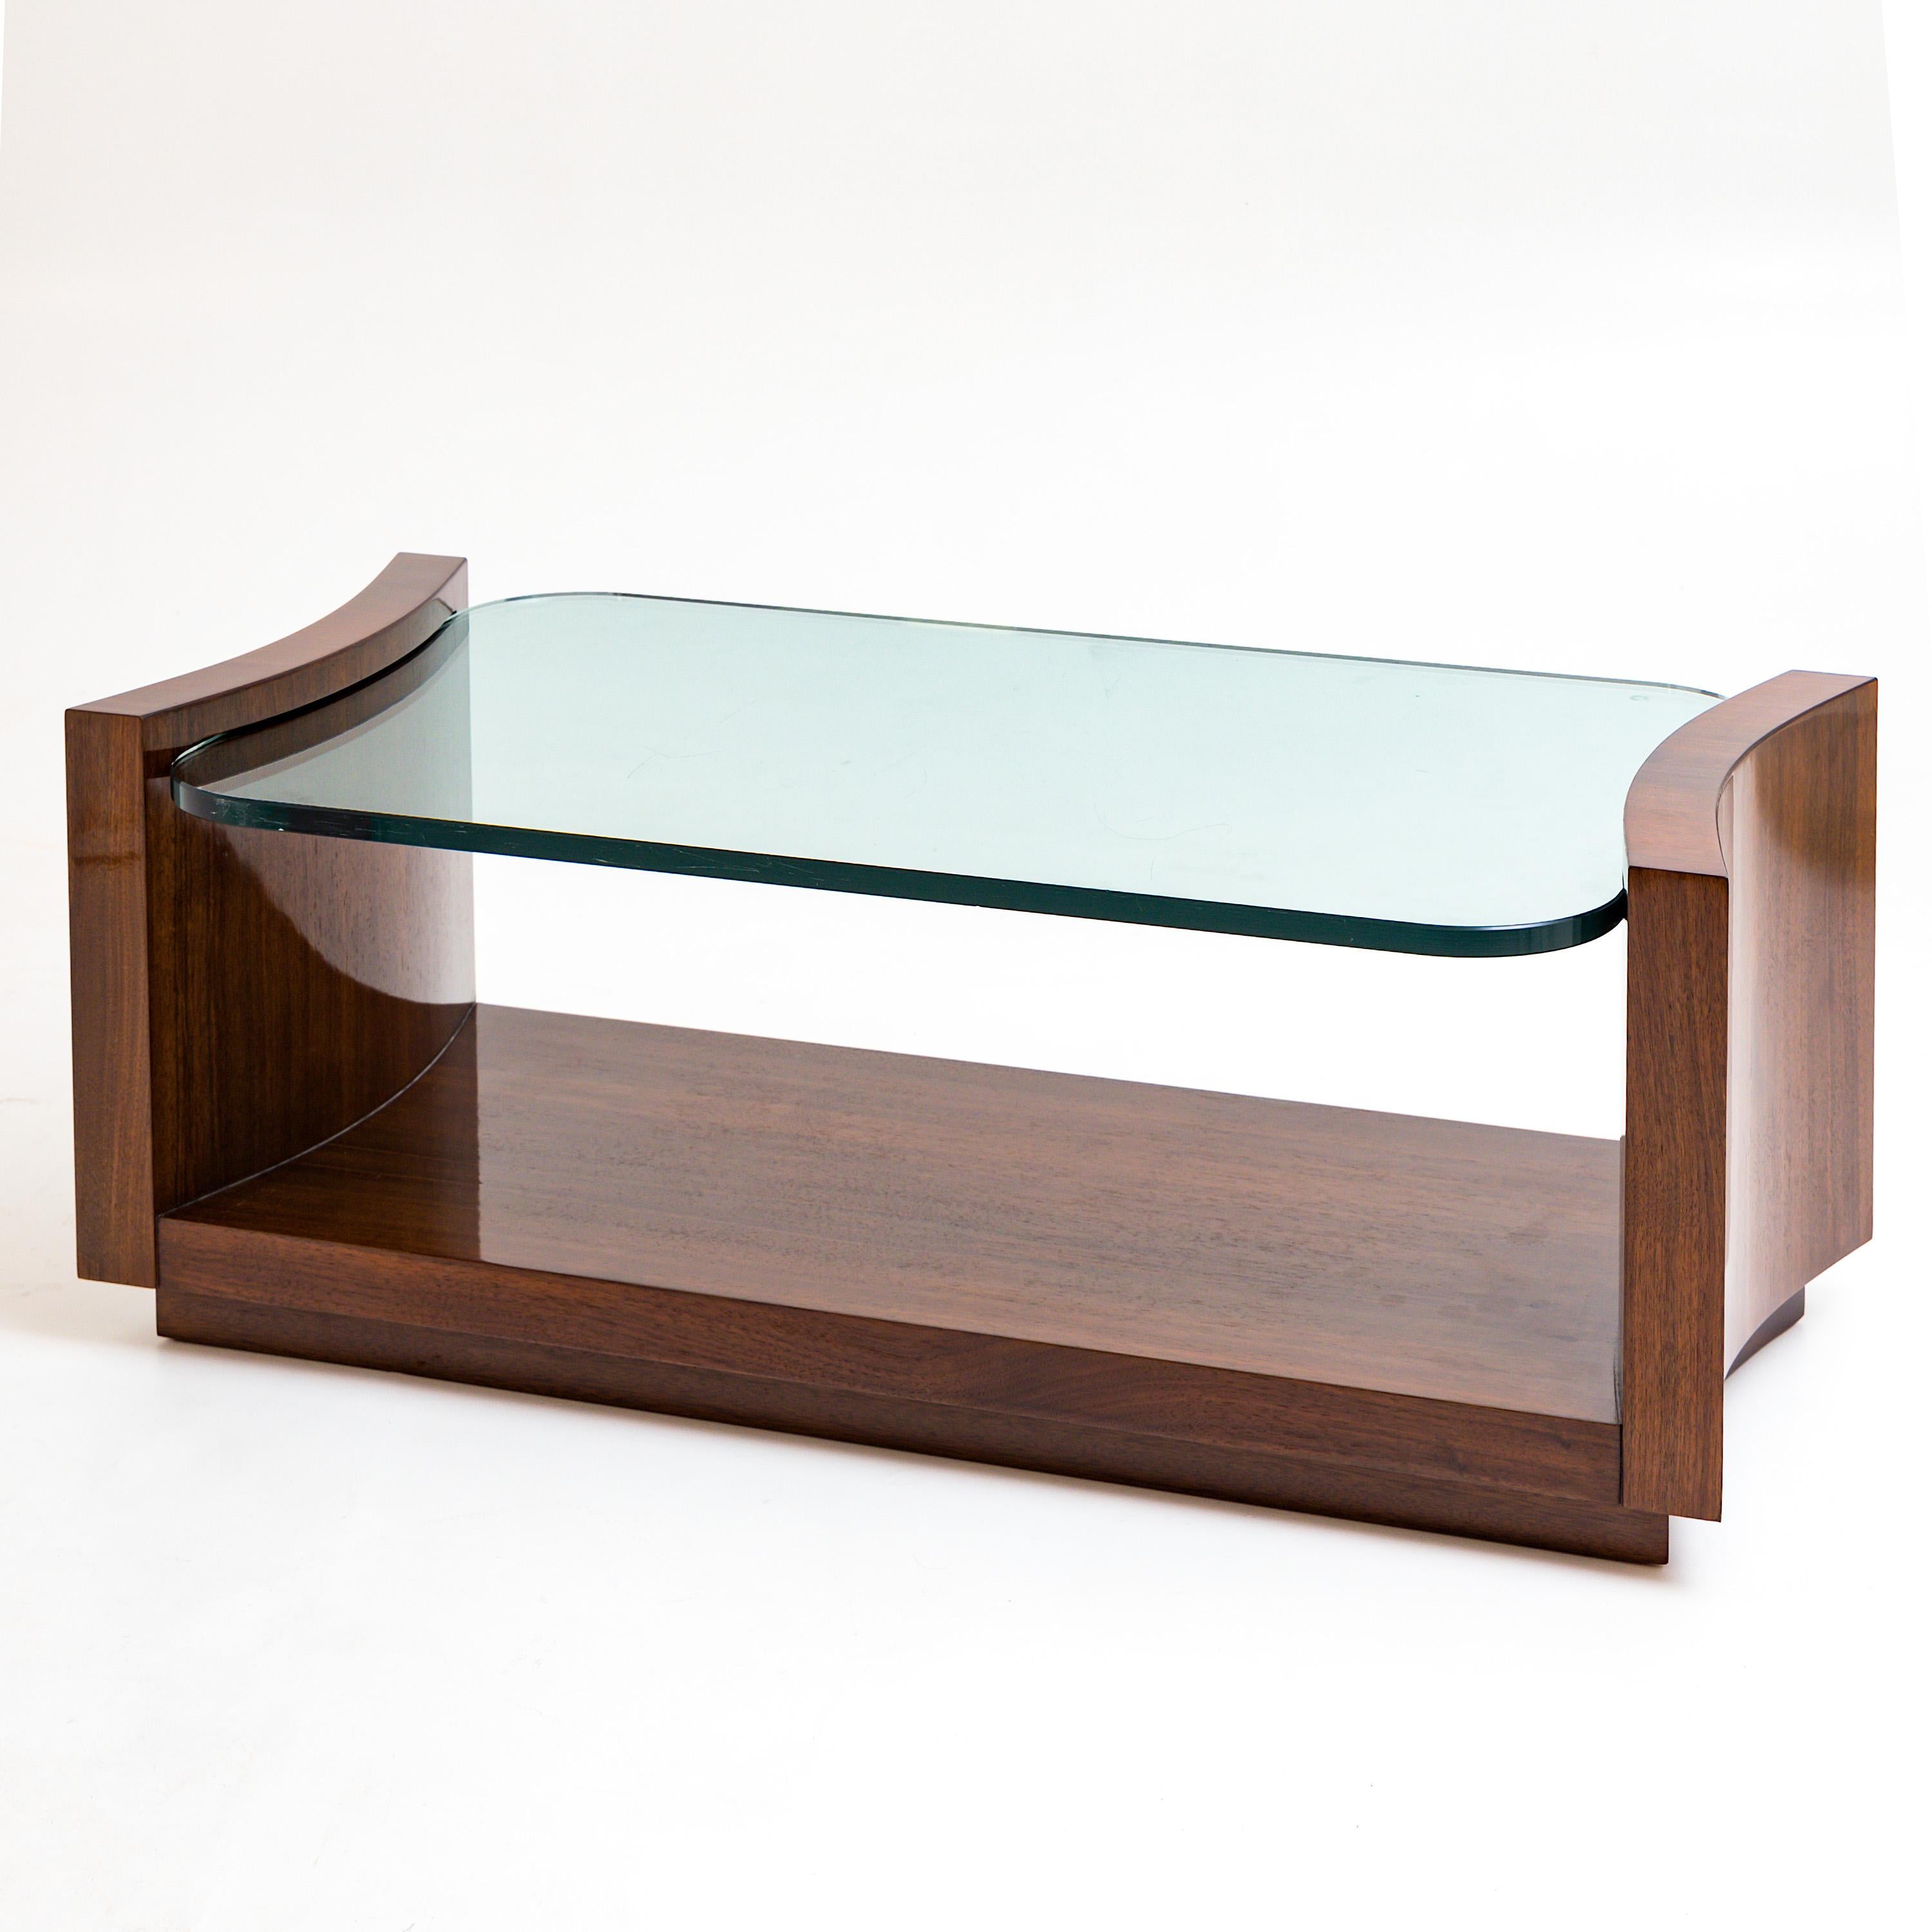 Rectangular coffee table with concave indented sides and thick rounded glass top. The furniture has been expertly refurbished and hand polished.